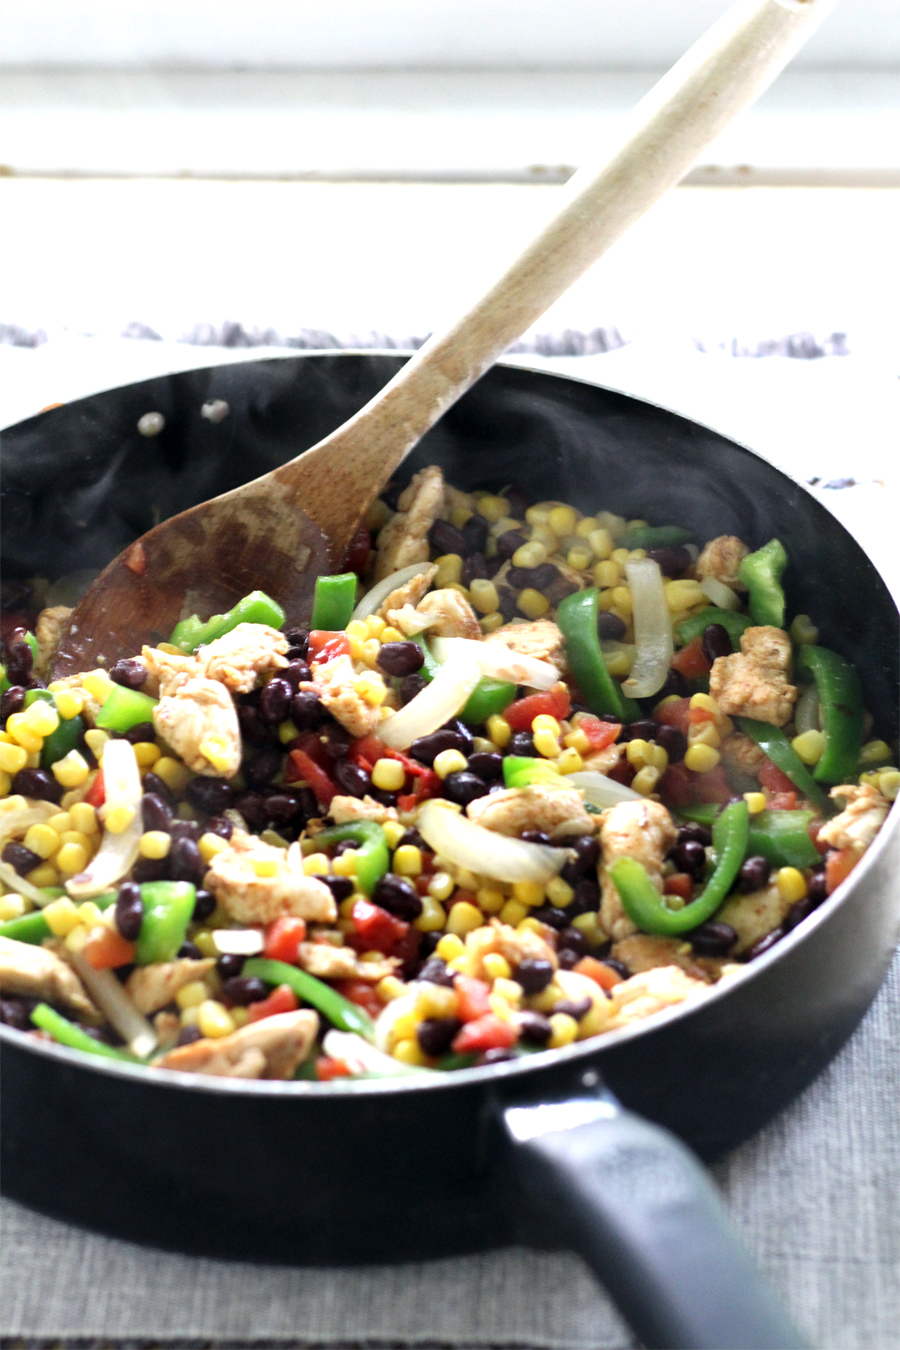 What's not to love about this Chicken Fajita Fiesta Skillet recipe? Tender chicken combined with peppers, onions, black beans, corn, and Mexican rice. One skillet, minimal mess, and full of bold flavors!